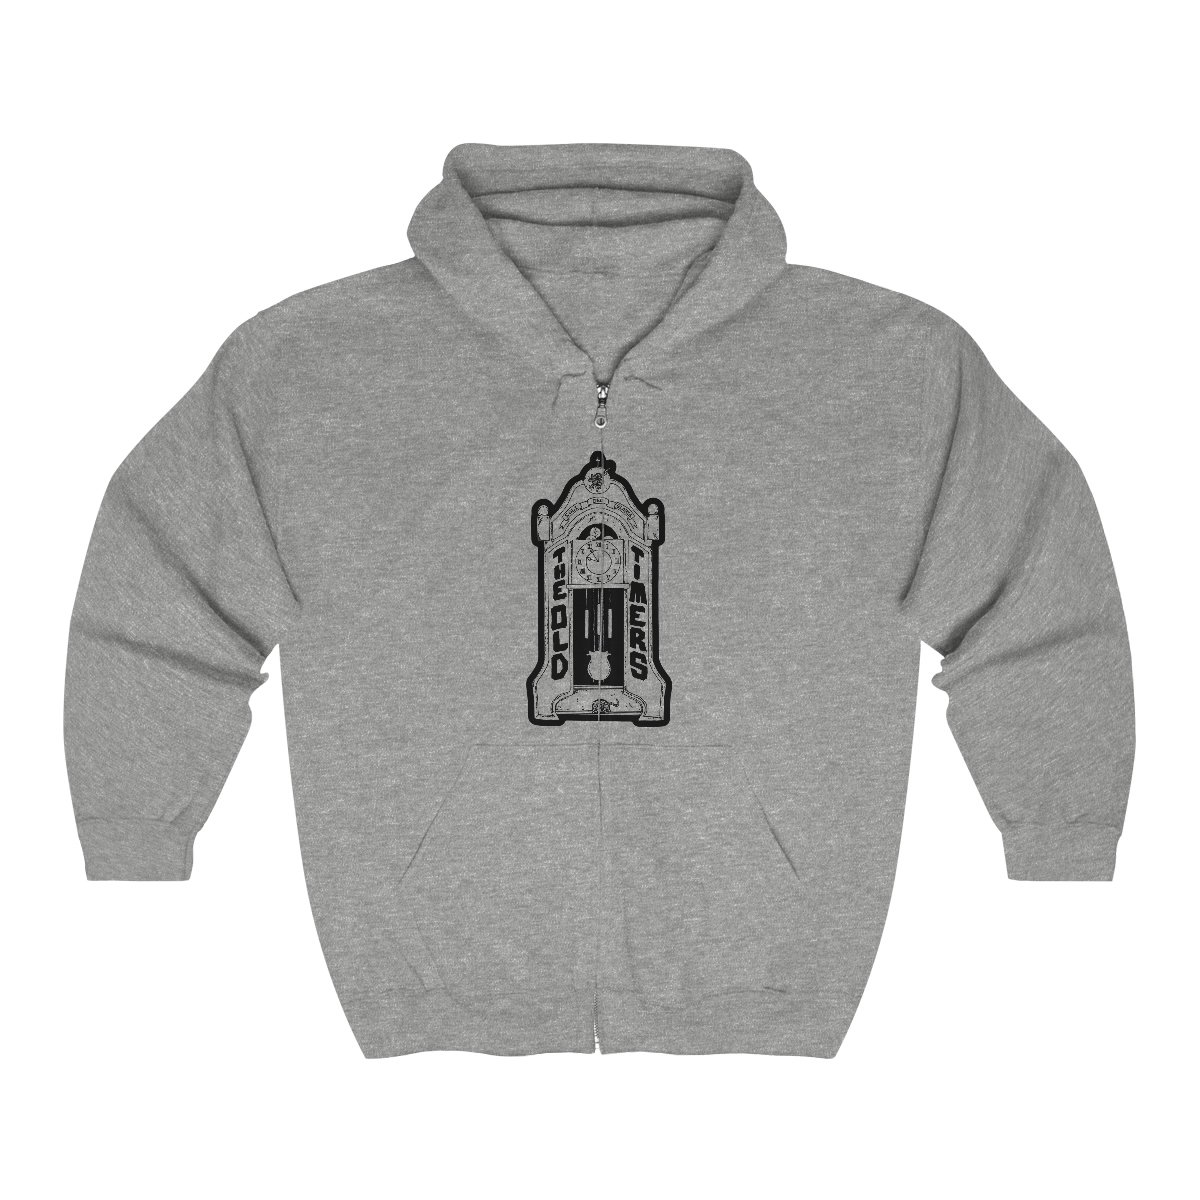 The Old Timers (TPR) Full Zip Hooded Sweatshirt